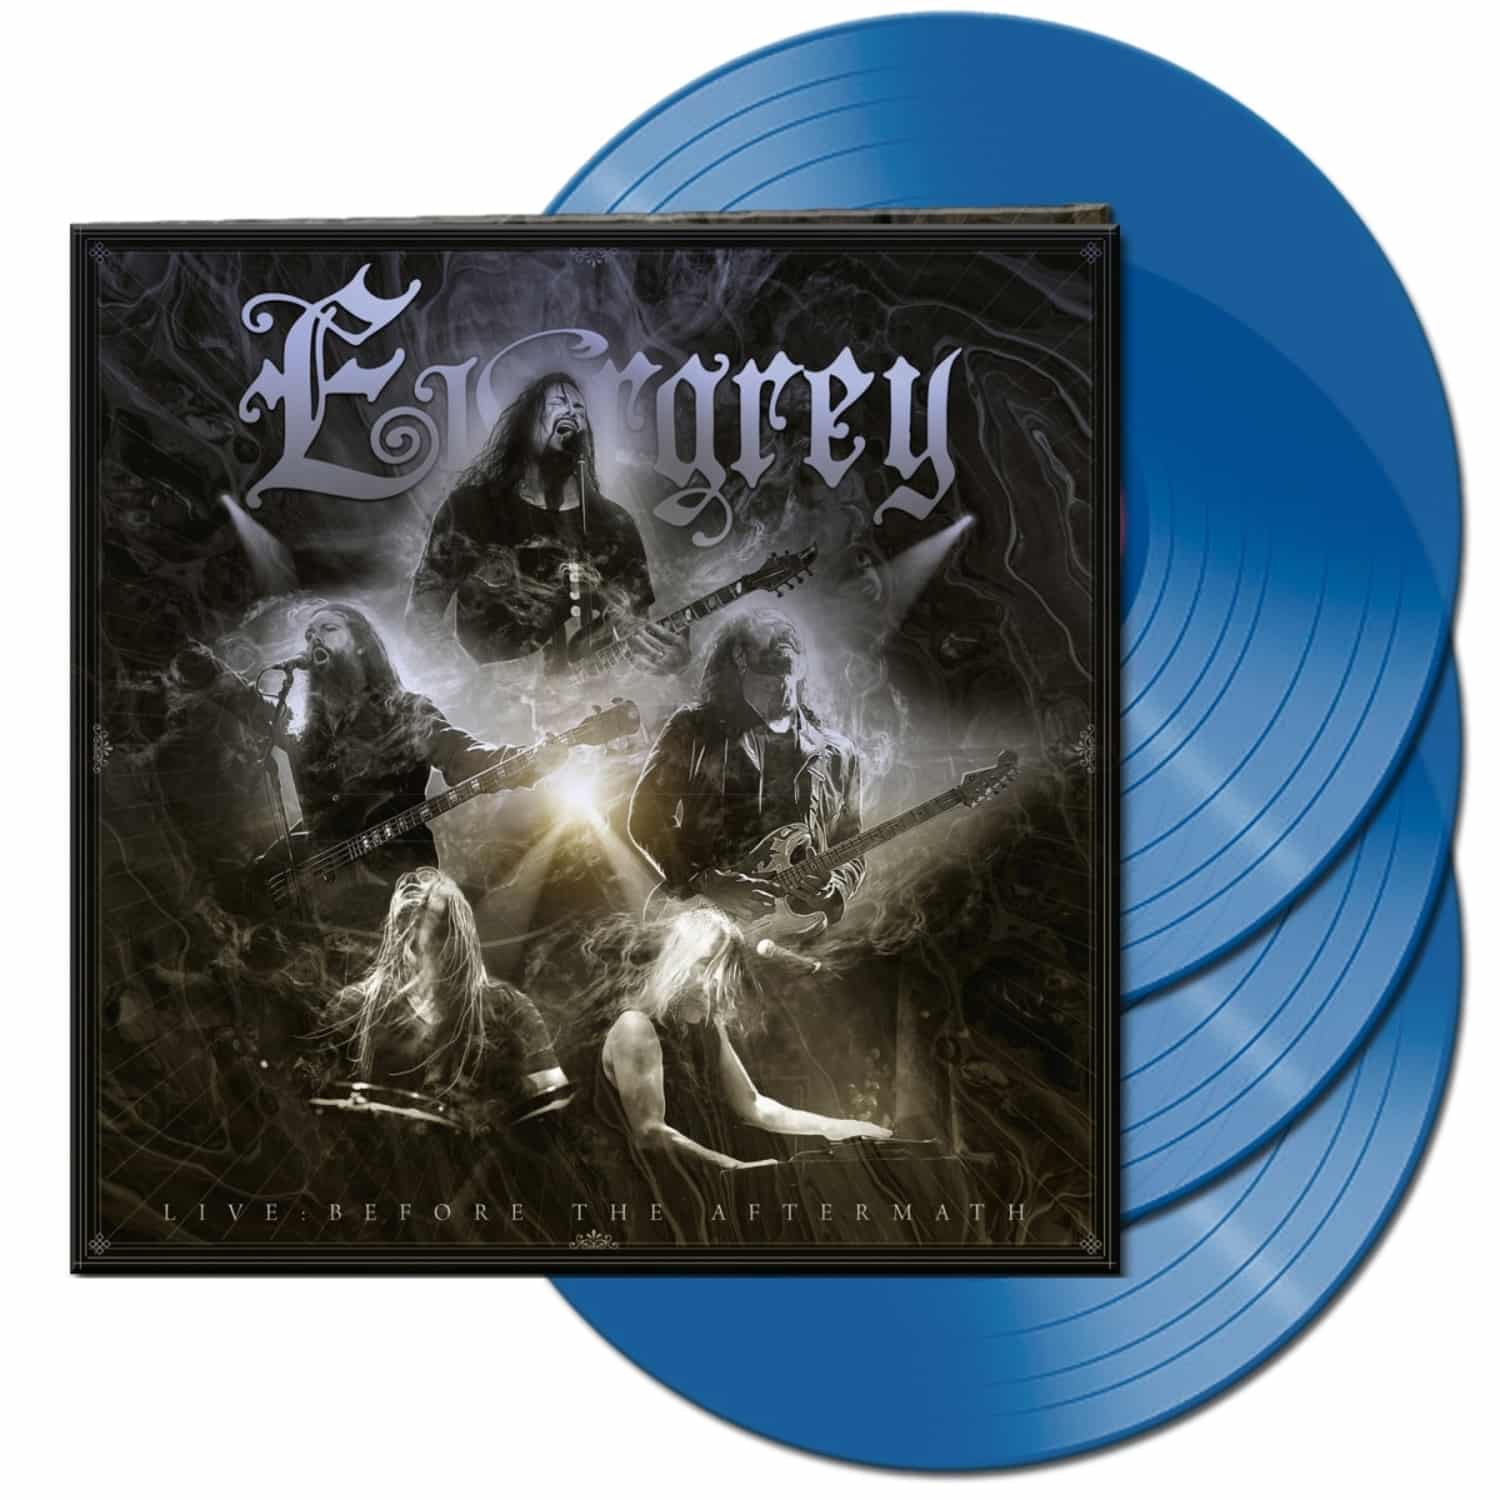 Evergrey - BEFORE THE AFTERMATH 